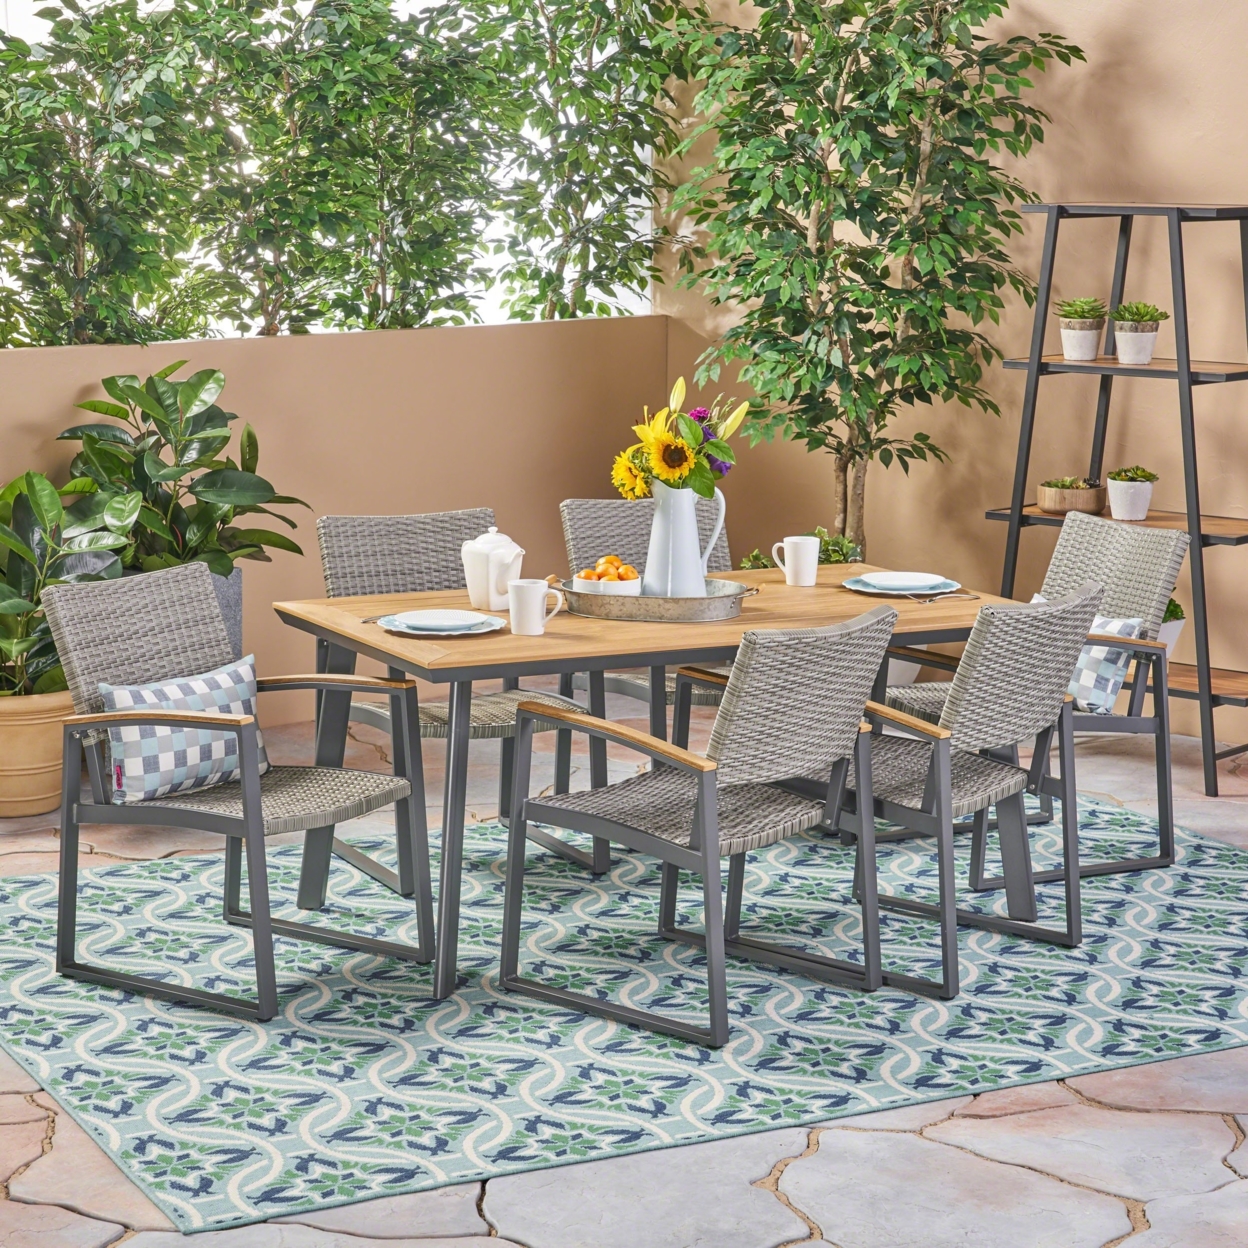 Loren Outdoor 7 Piece Aluminum And Wicker Dining Set With Wood Top, Natural Finish And Gray